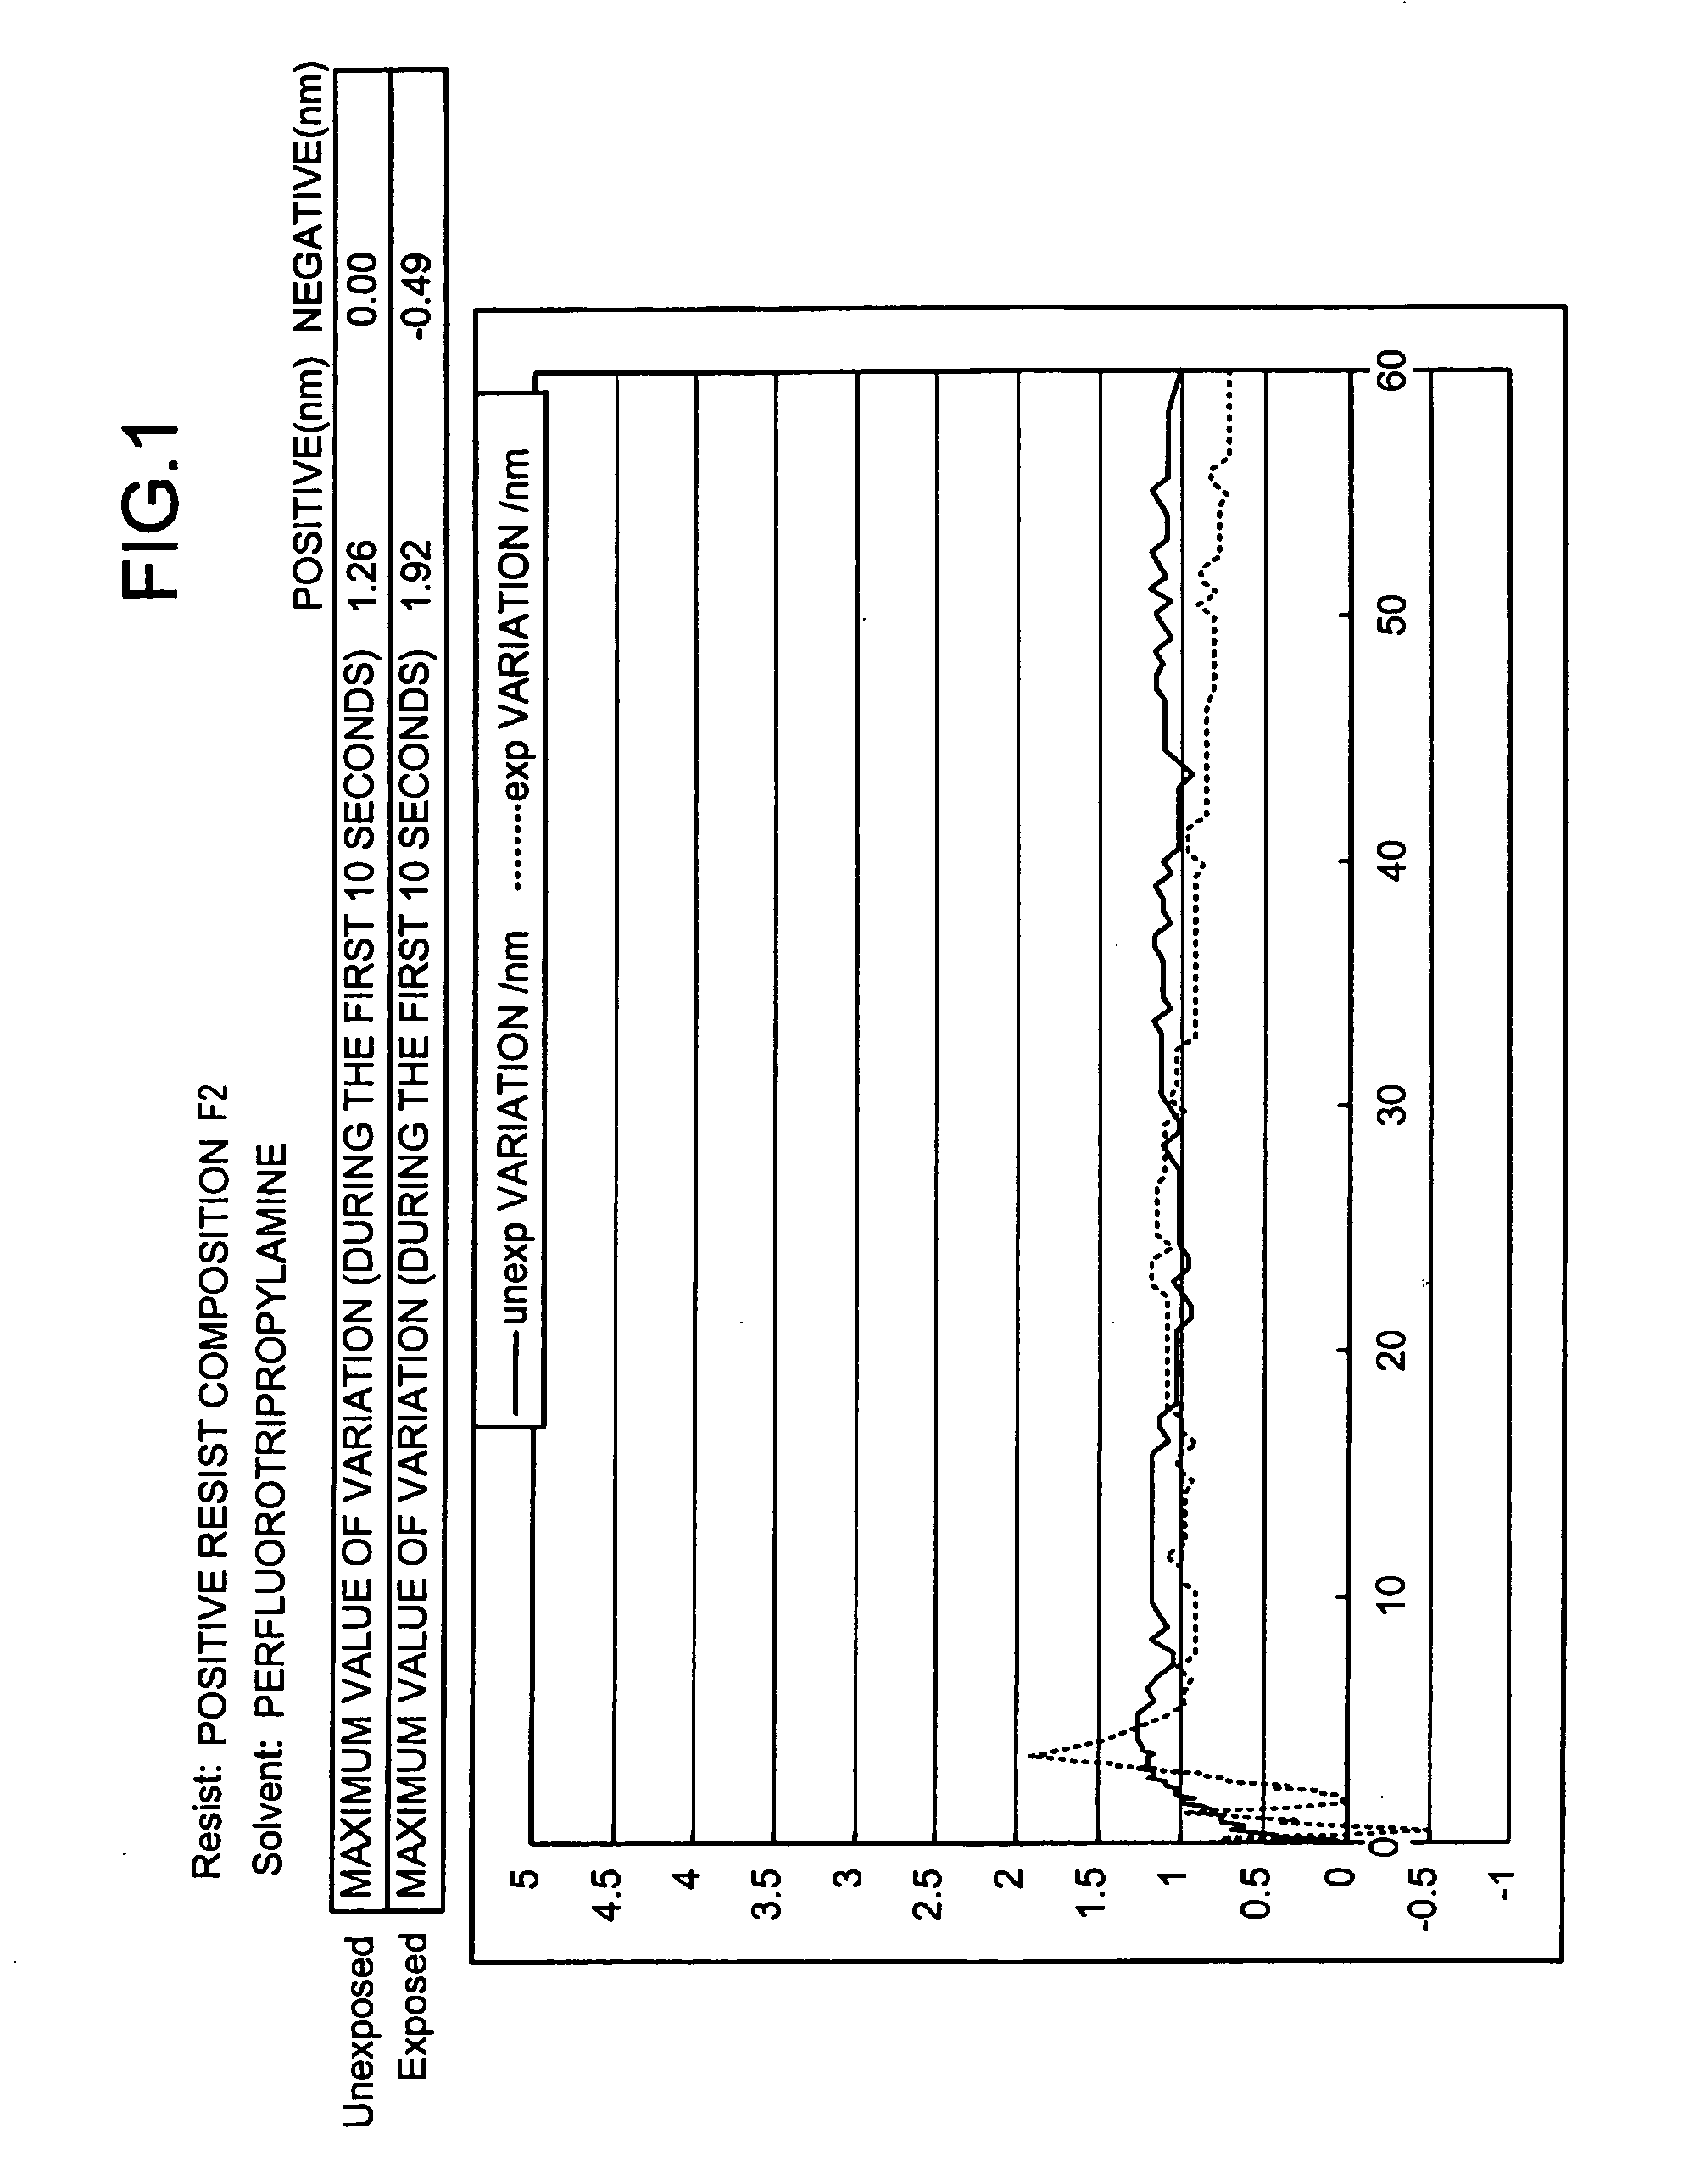 Immersion fluid for use in liquid immersion lithography and method of forming resist pattern using the immersion fluid